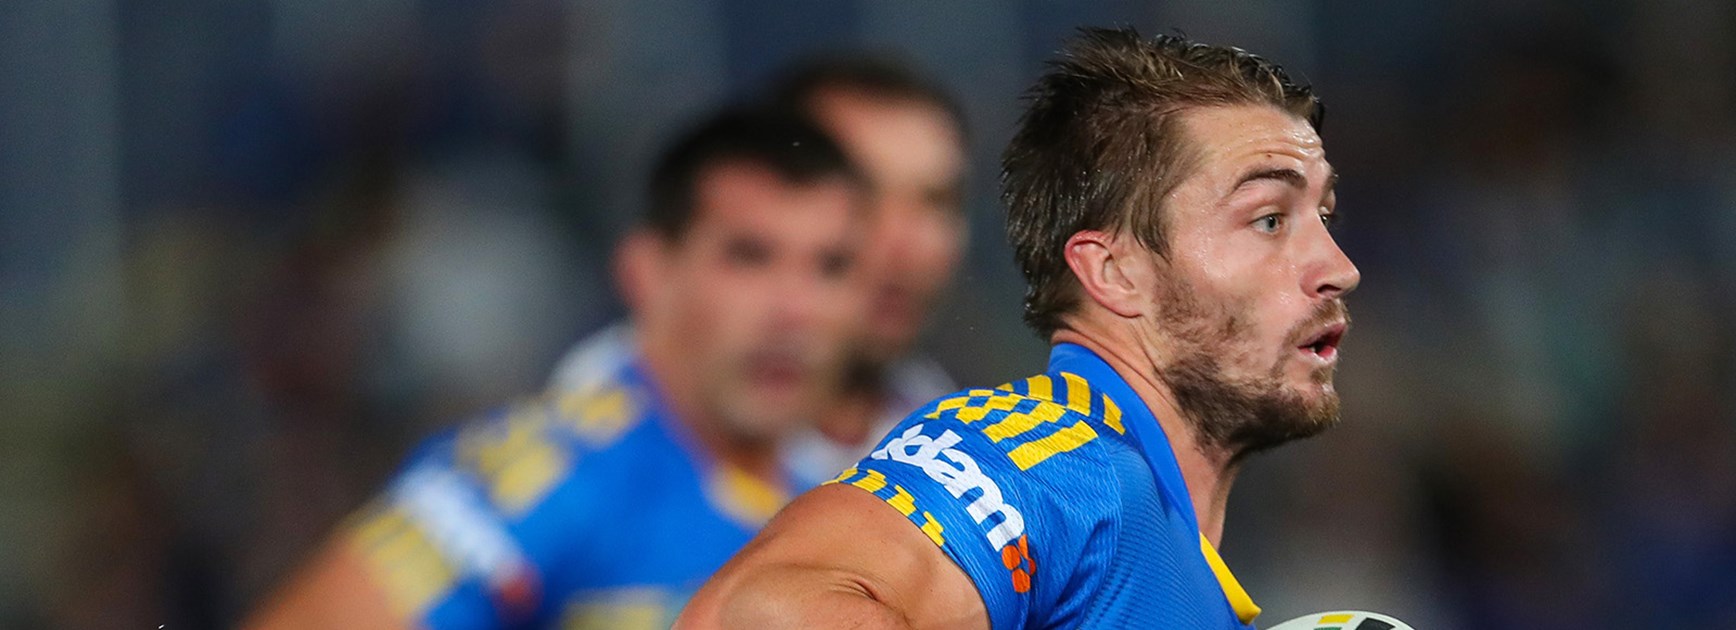 Kieran Foran made his return in Round 11 against the Storm.